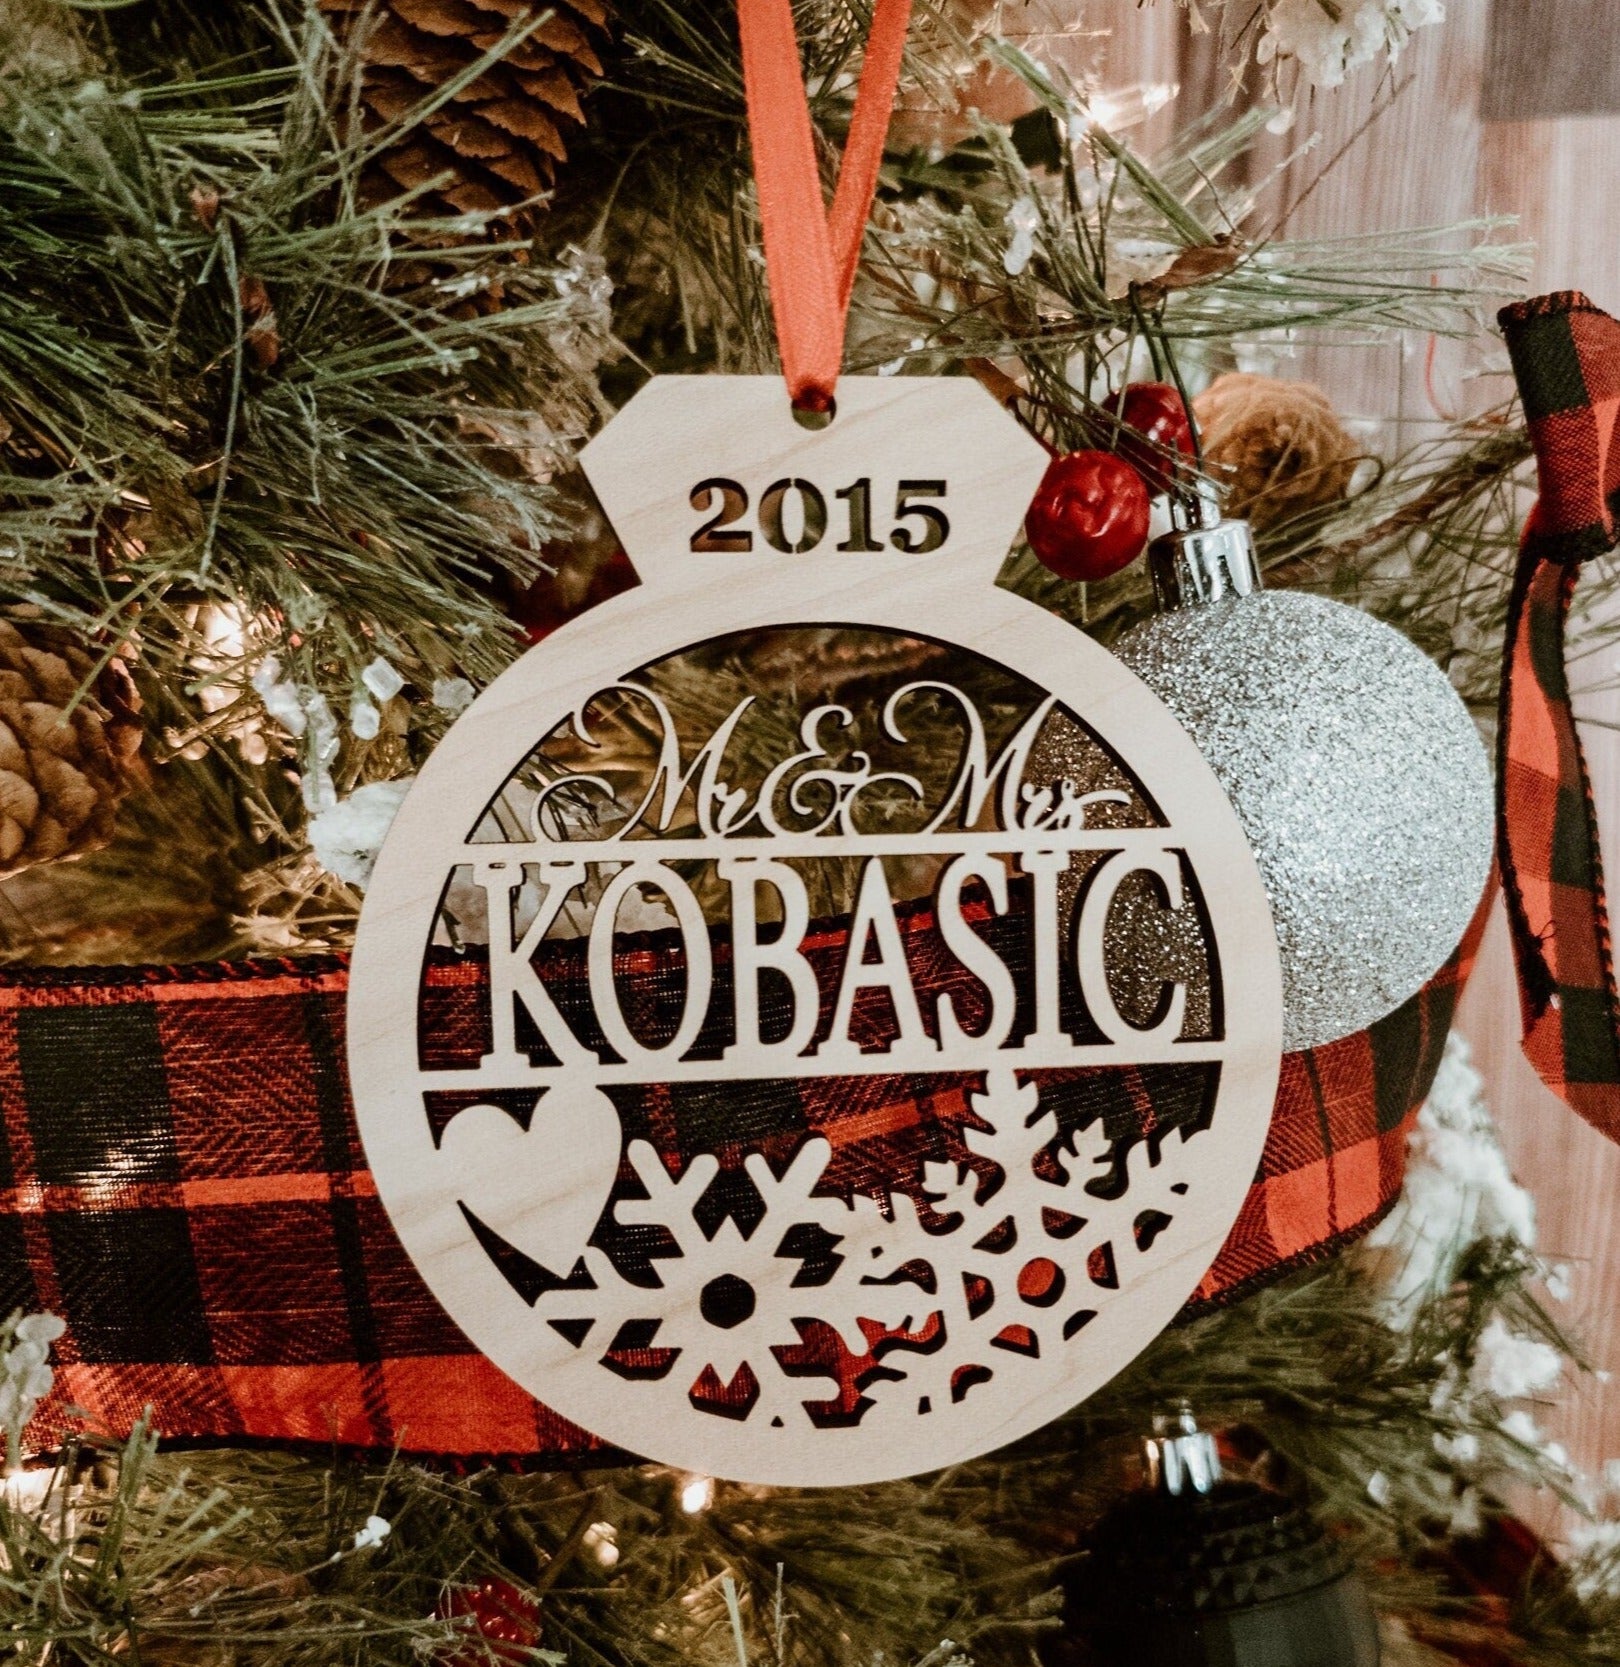 Newly Wed Christmas Ornament, Personalized gift with couple's last name + date, First Year As  Mr & Mrs Husband and Wife custom keepsake